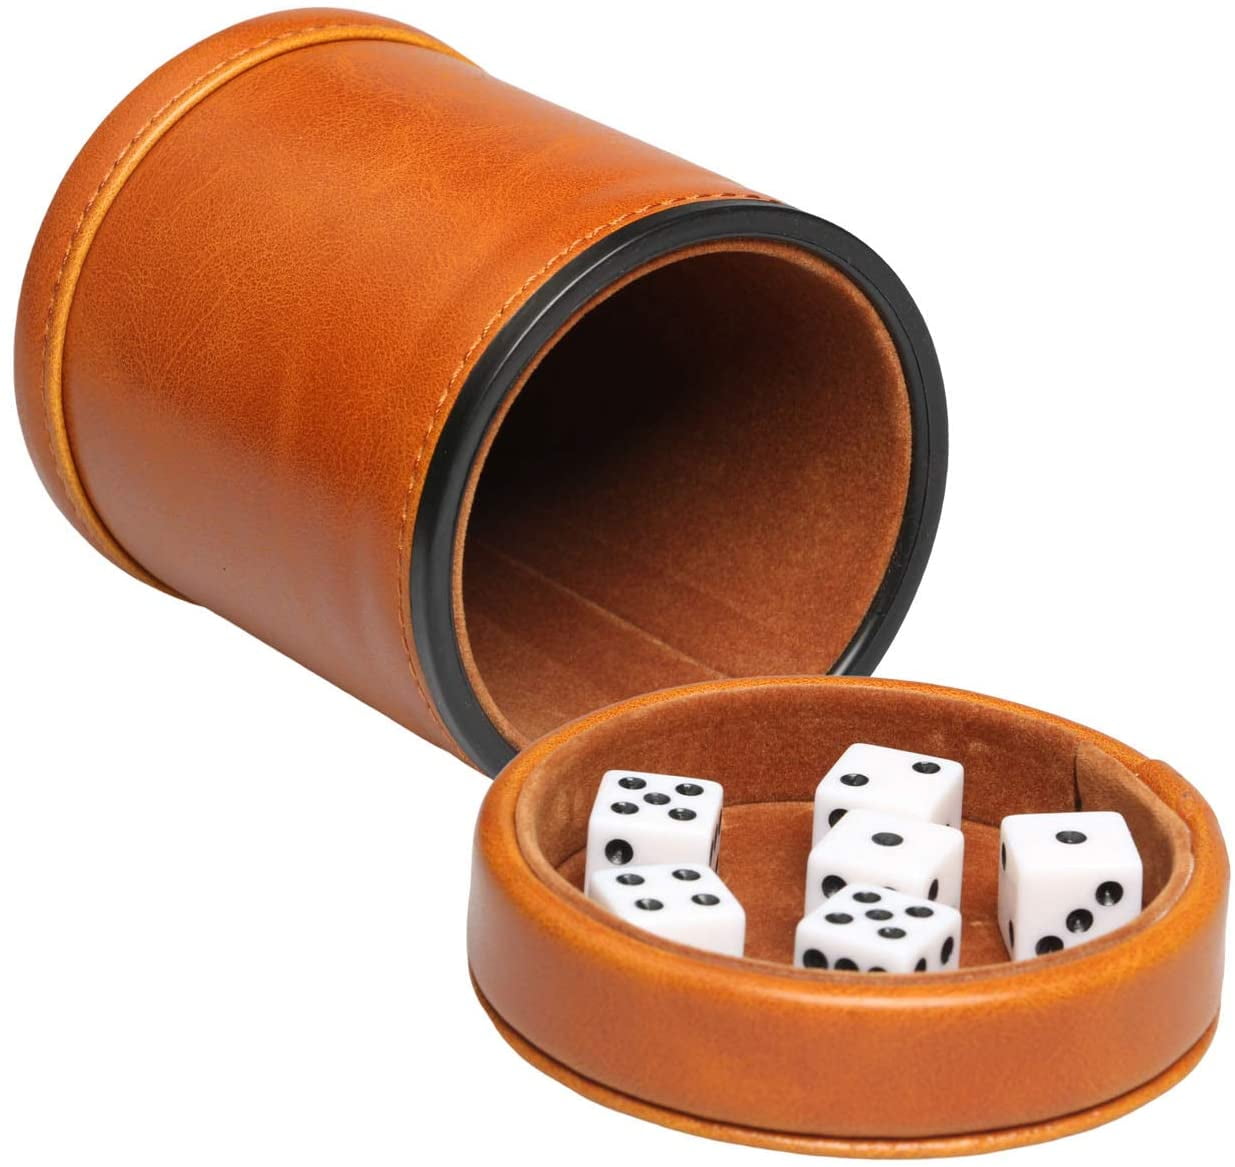 Luck Lab Leather Dice Cup with Lid Including 5 Dice Use for Liars Dice Farkle Yahtzee Board Games Black Red Velvet Interior for Quiet Shaking 